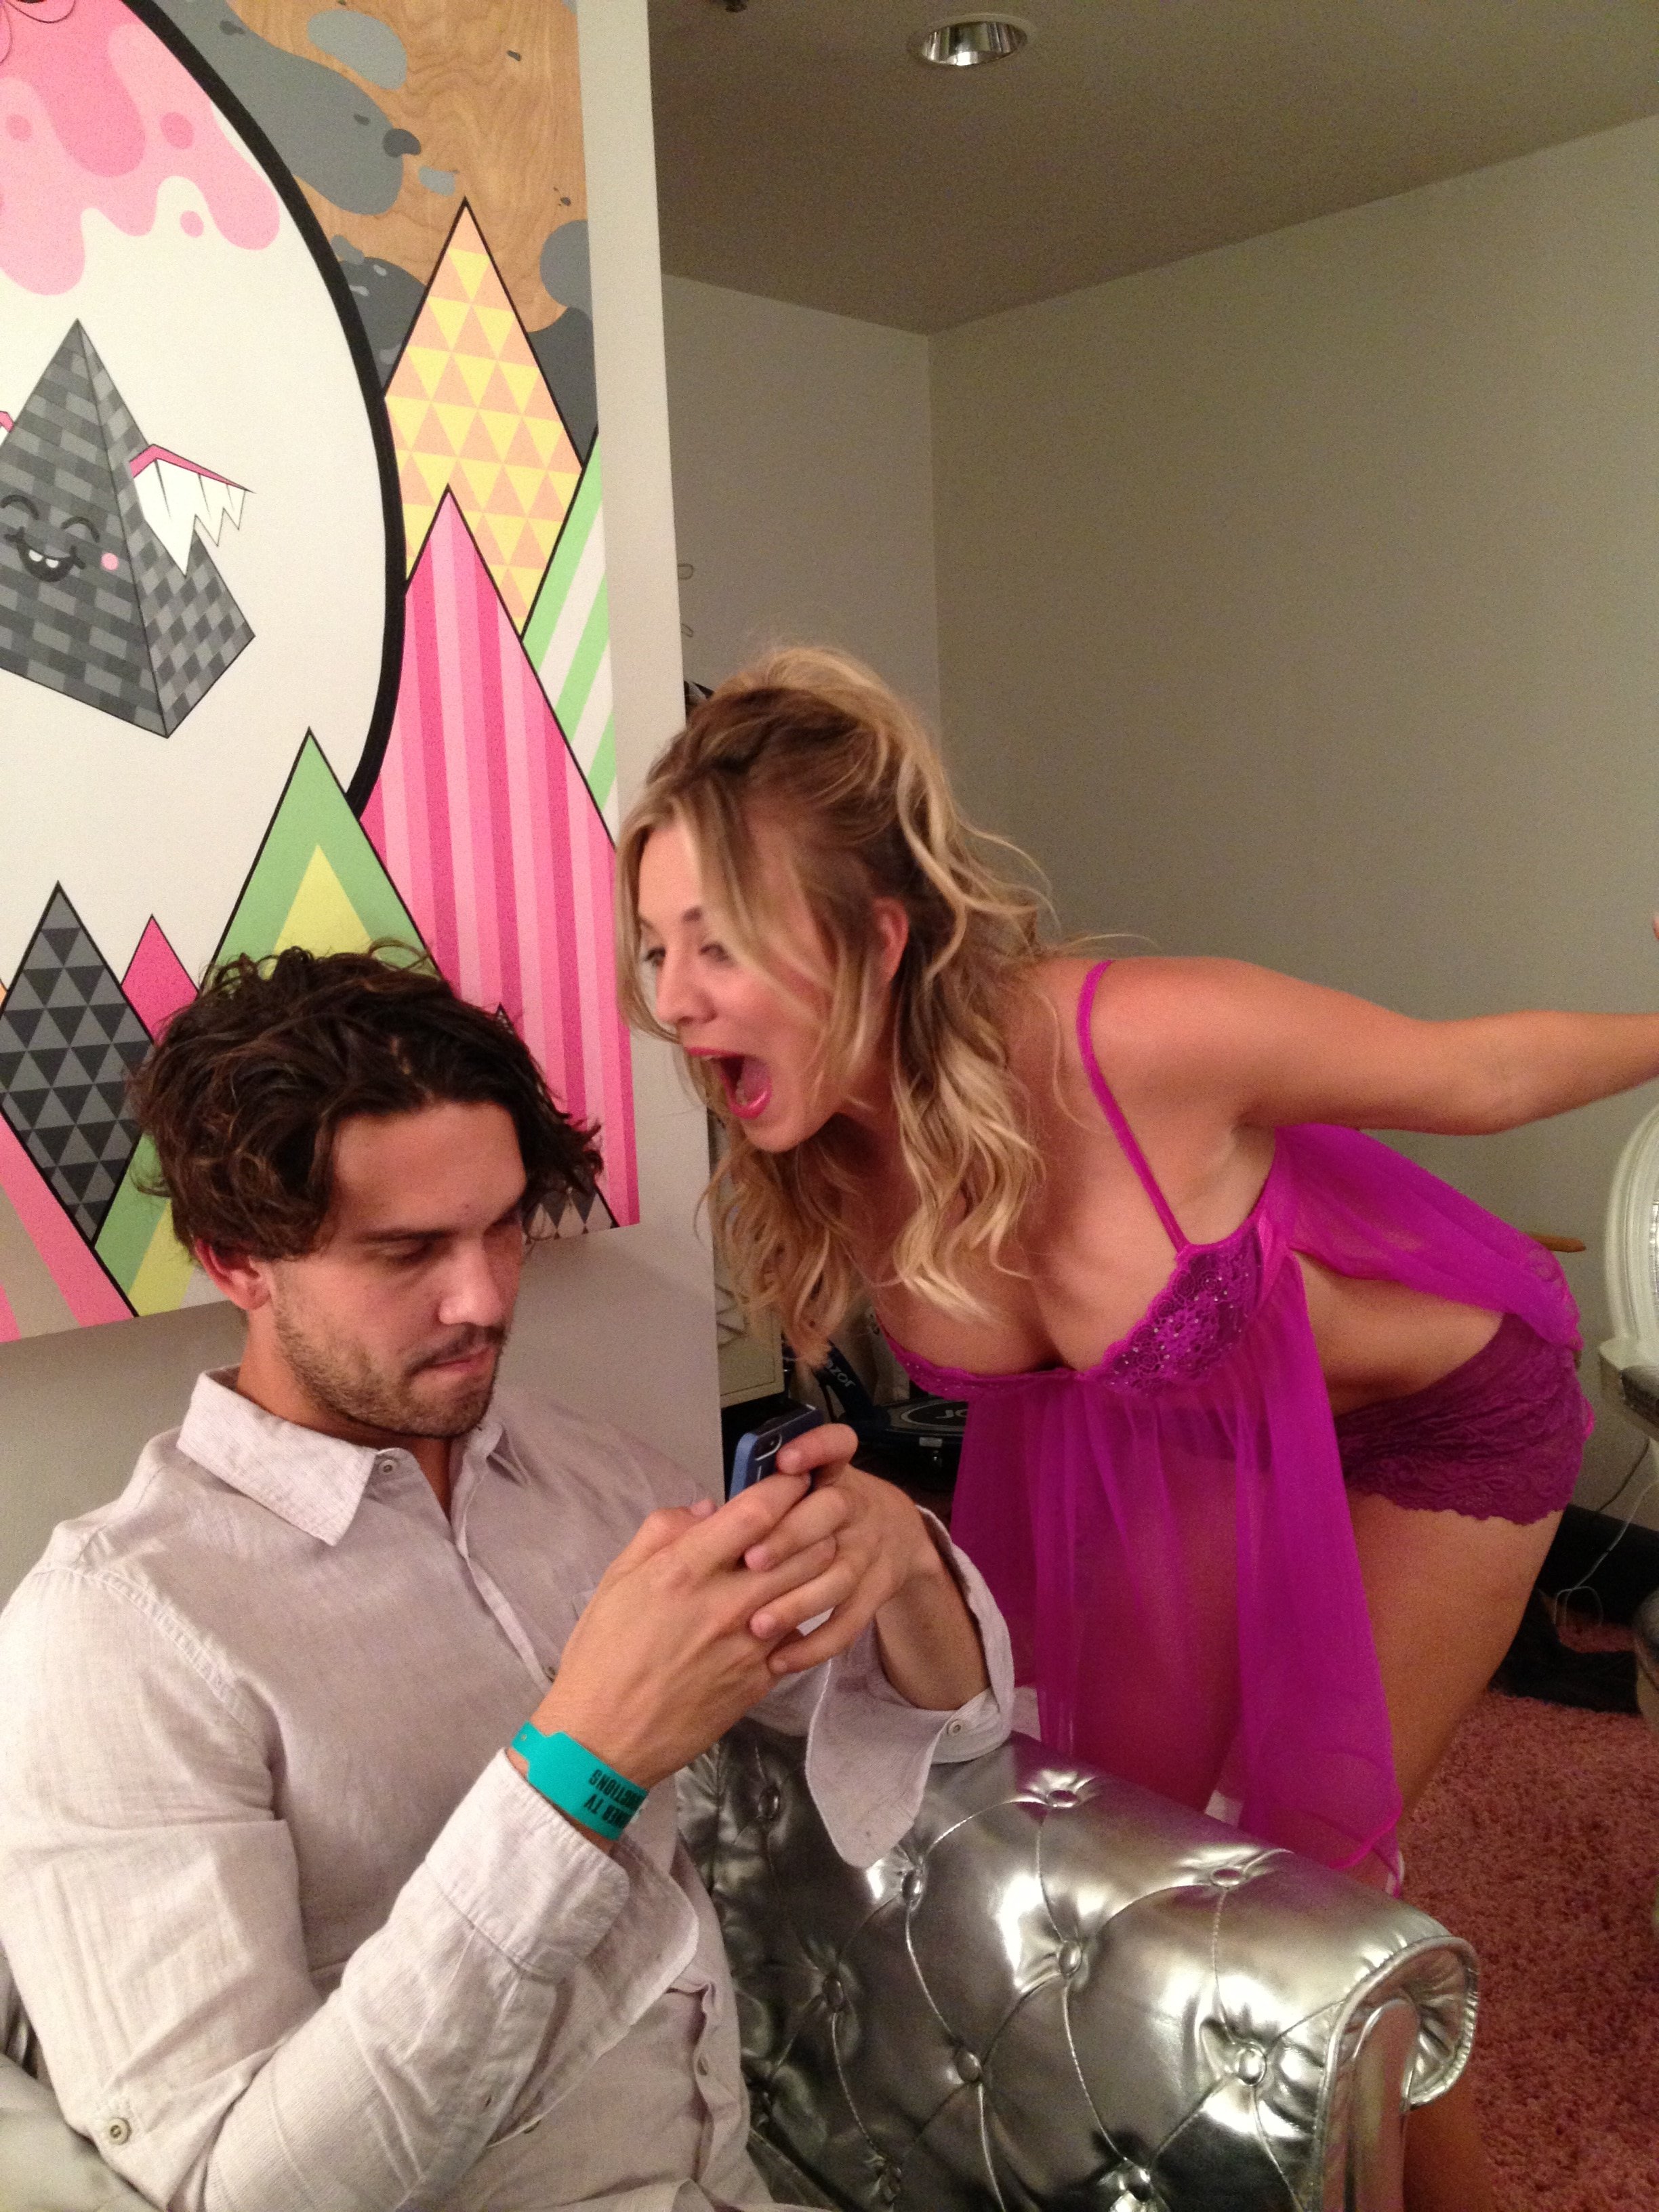 blonde actress kaley cuoco hacked pic of her showing her cleavage to her boyfriend in pink outfit